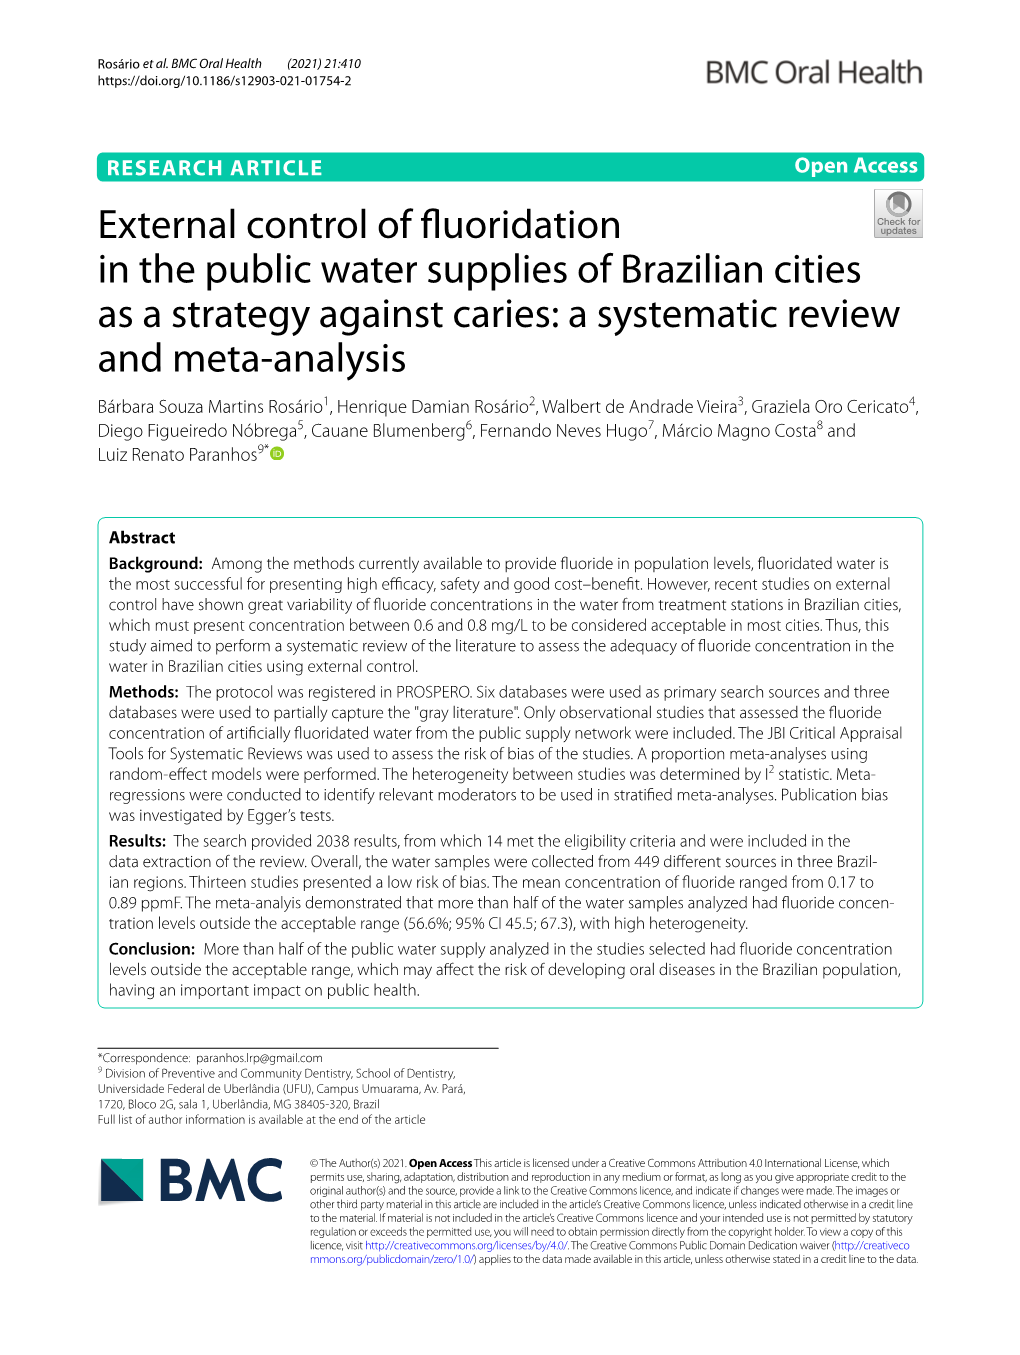 External Control of Fluoridation in the Public Water Supplies of Brazilian